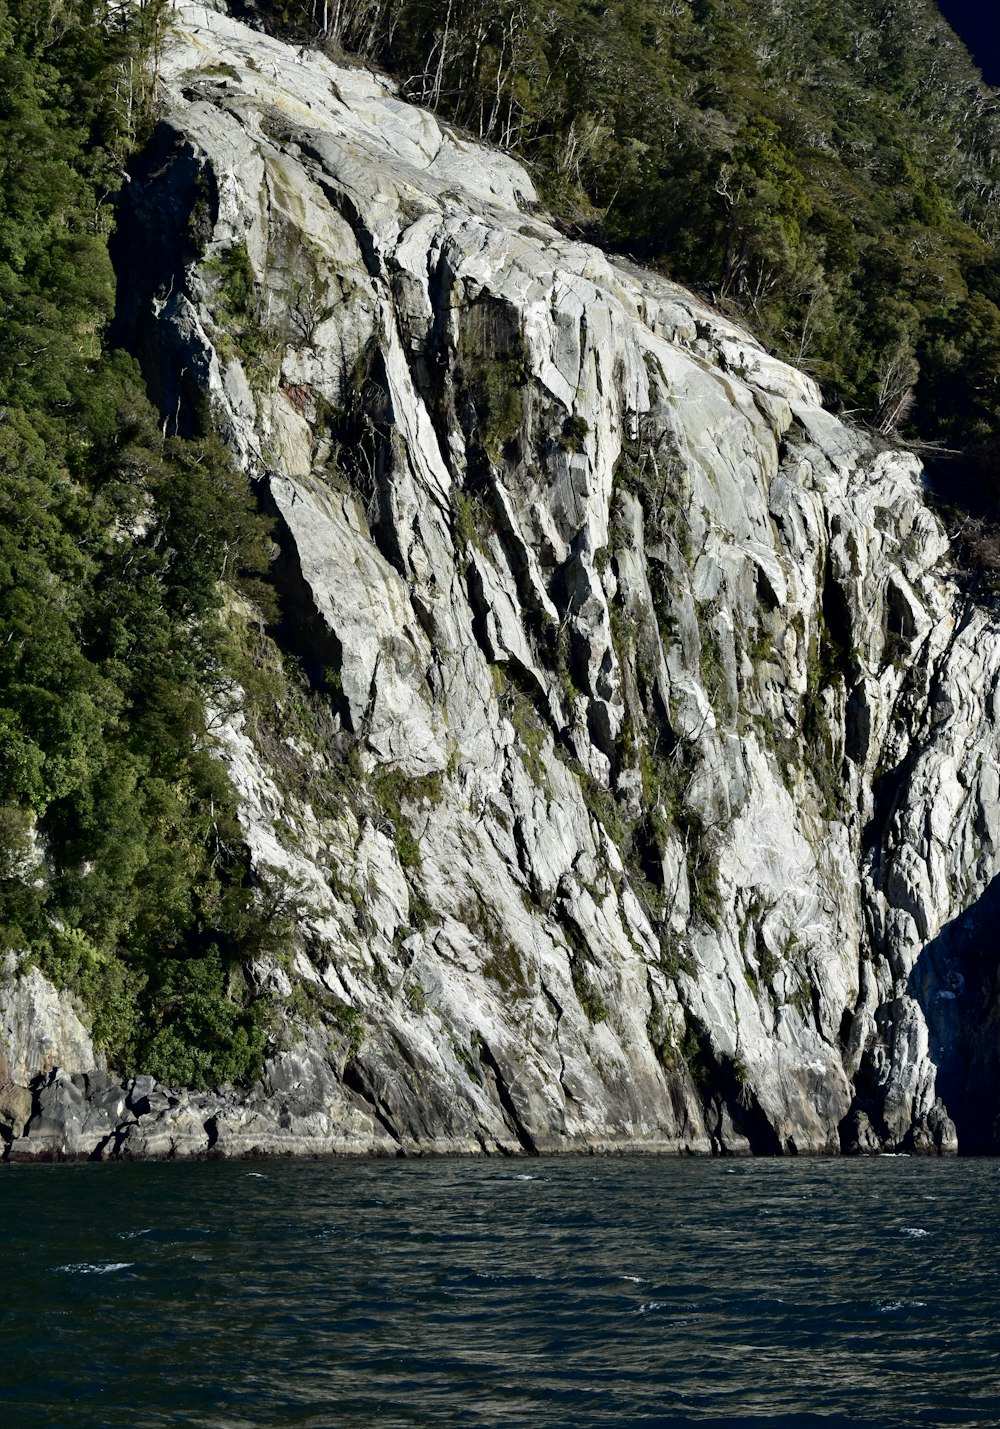 a large rock face next to a body of water